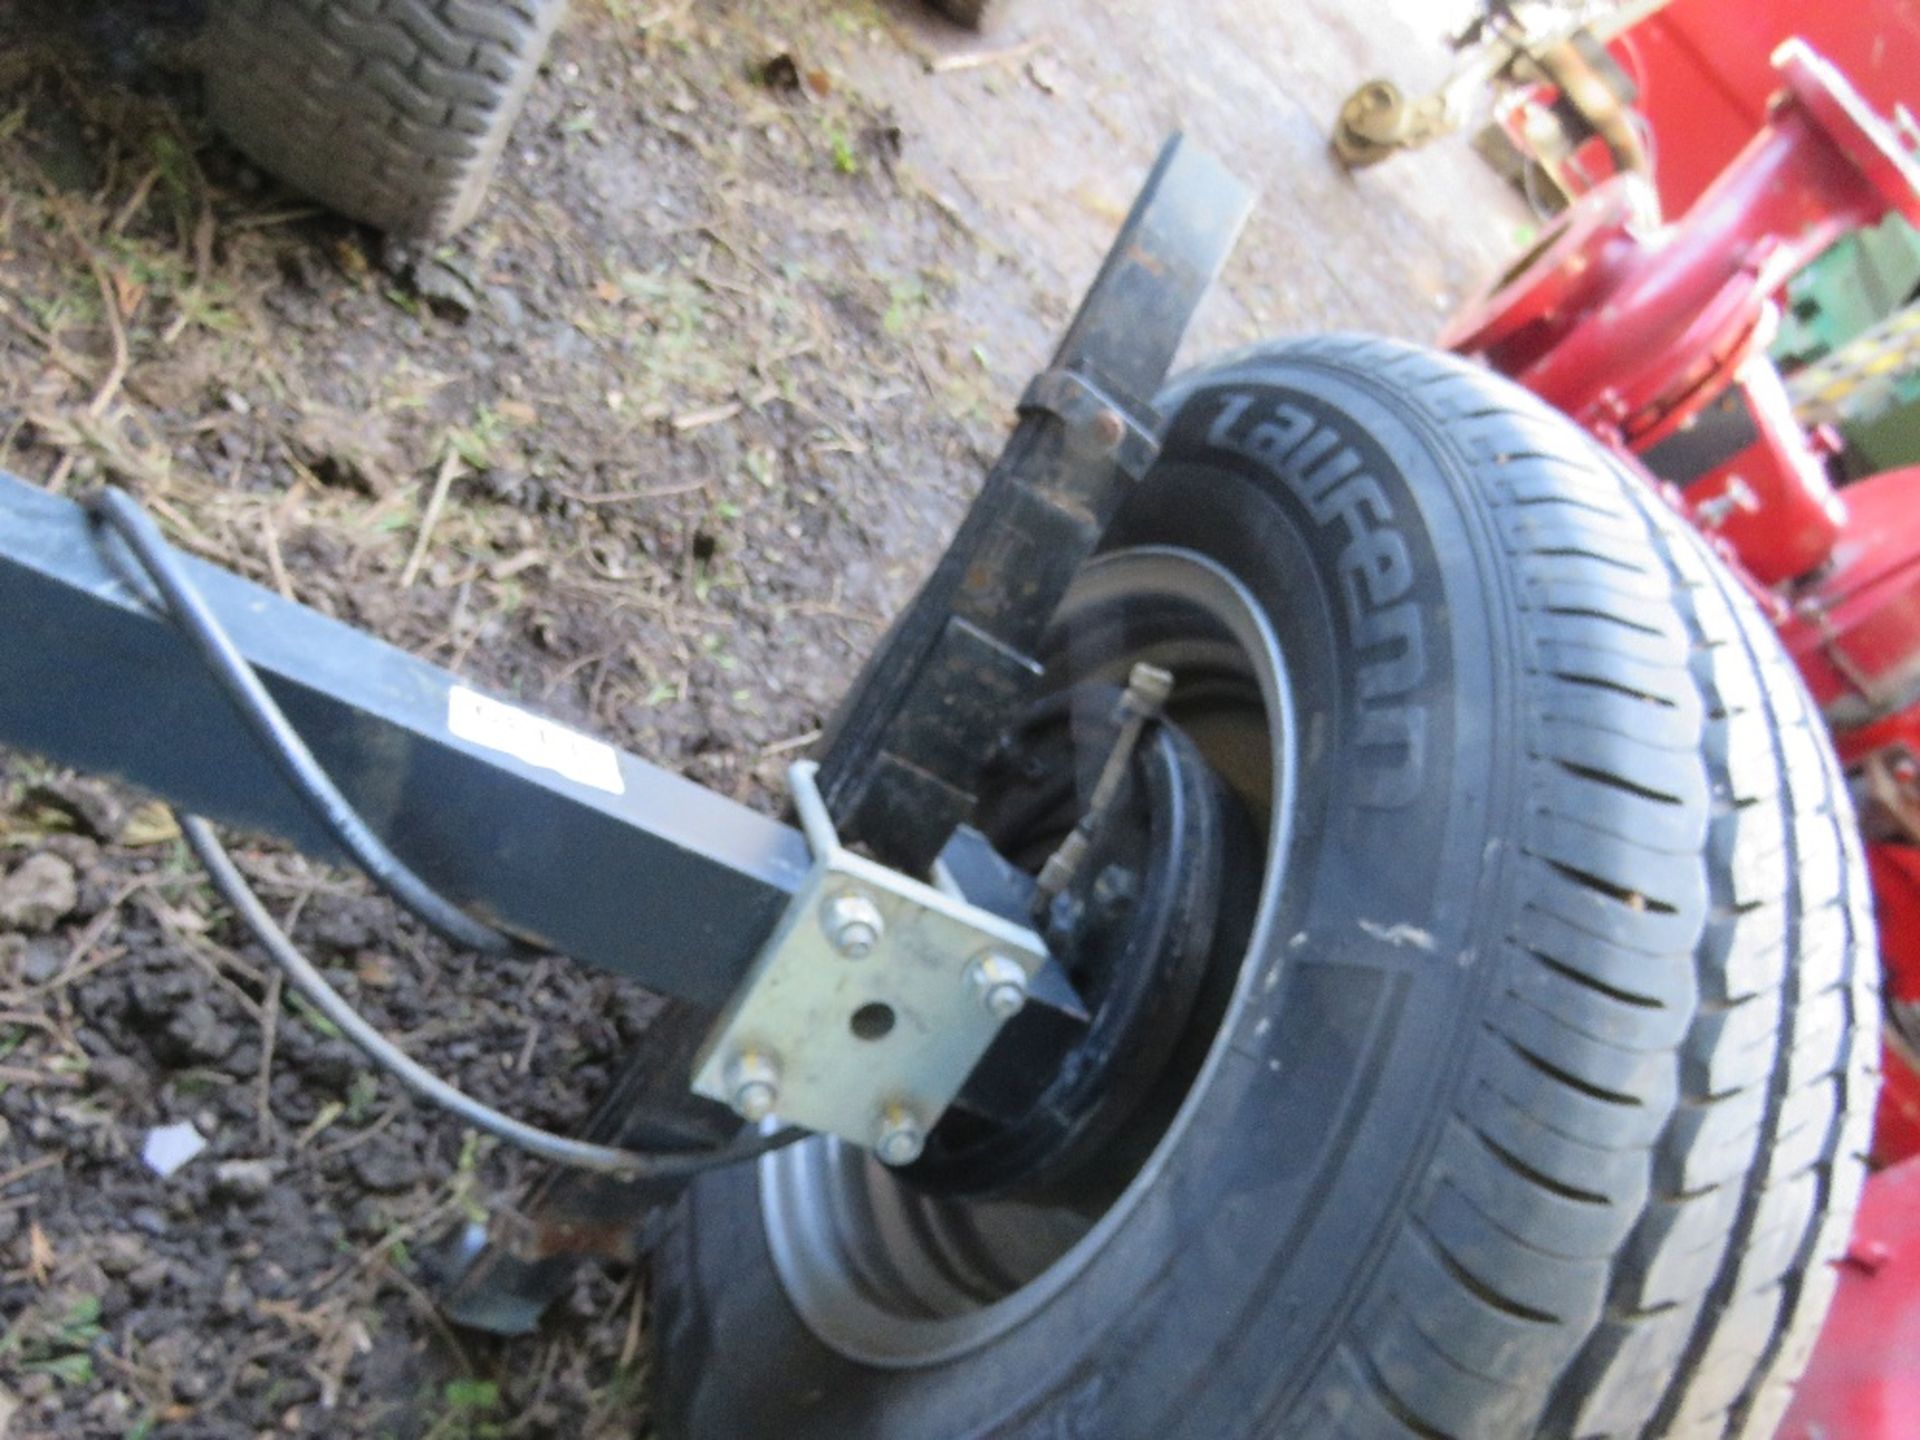 HEAVY DUTY TRAILER AXLE WITH SPRINGS, BELIEVED TO BE OFF GROUNDHOG TYPE WELFARE UNIT?? ....THIS LOT - Image 3 of 6